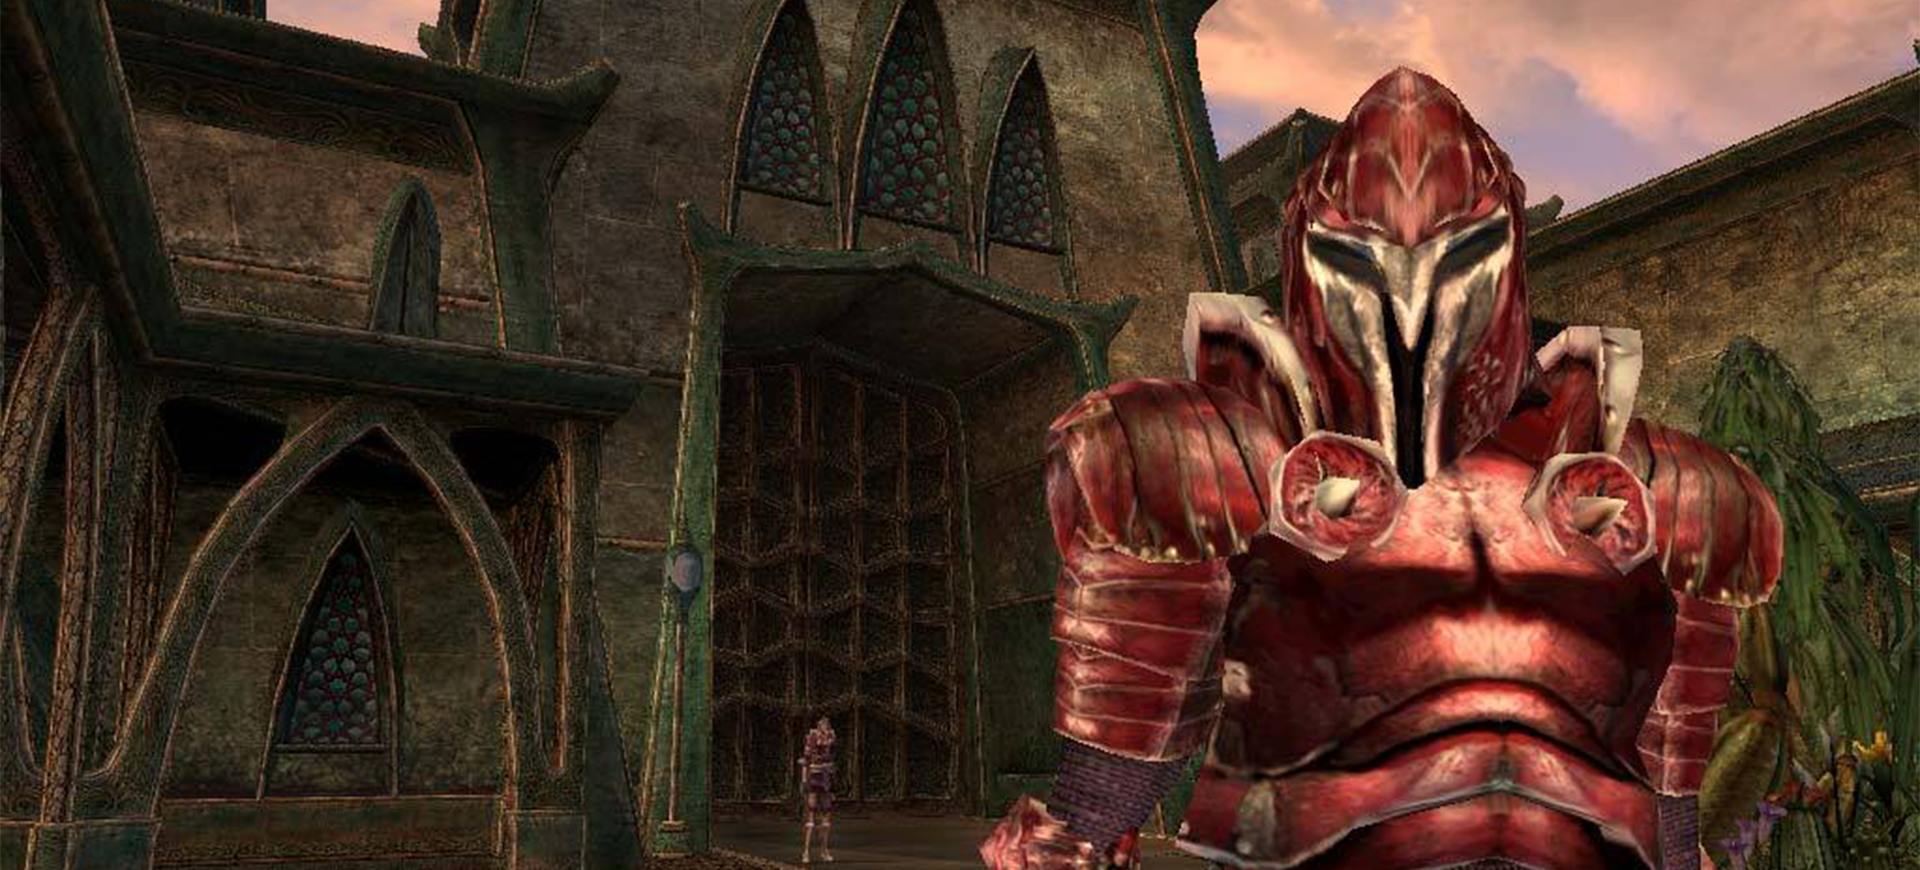 How Morrowind inspired a generation of developers